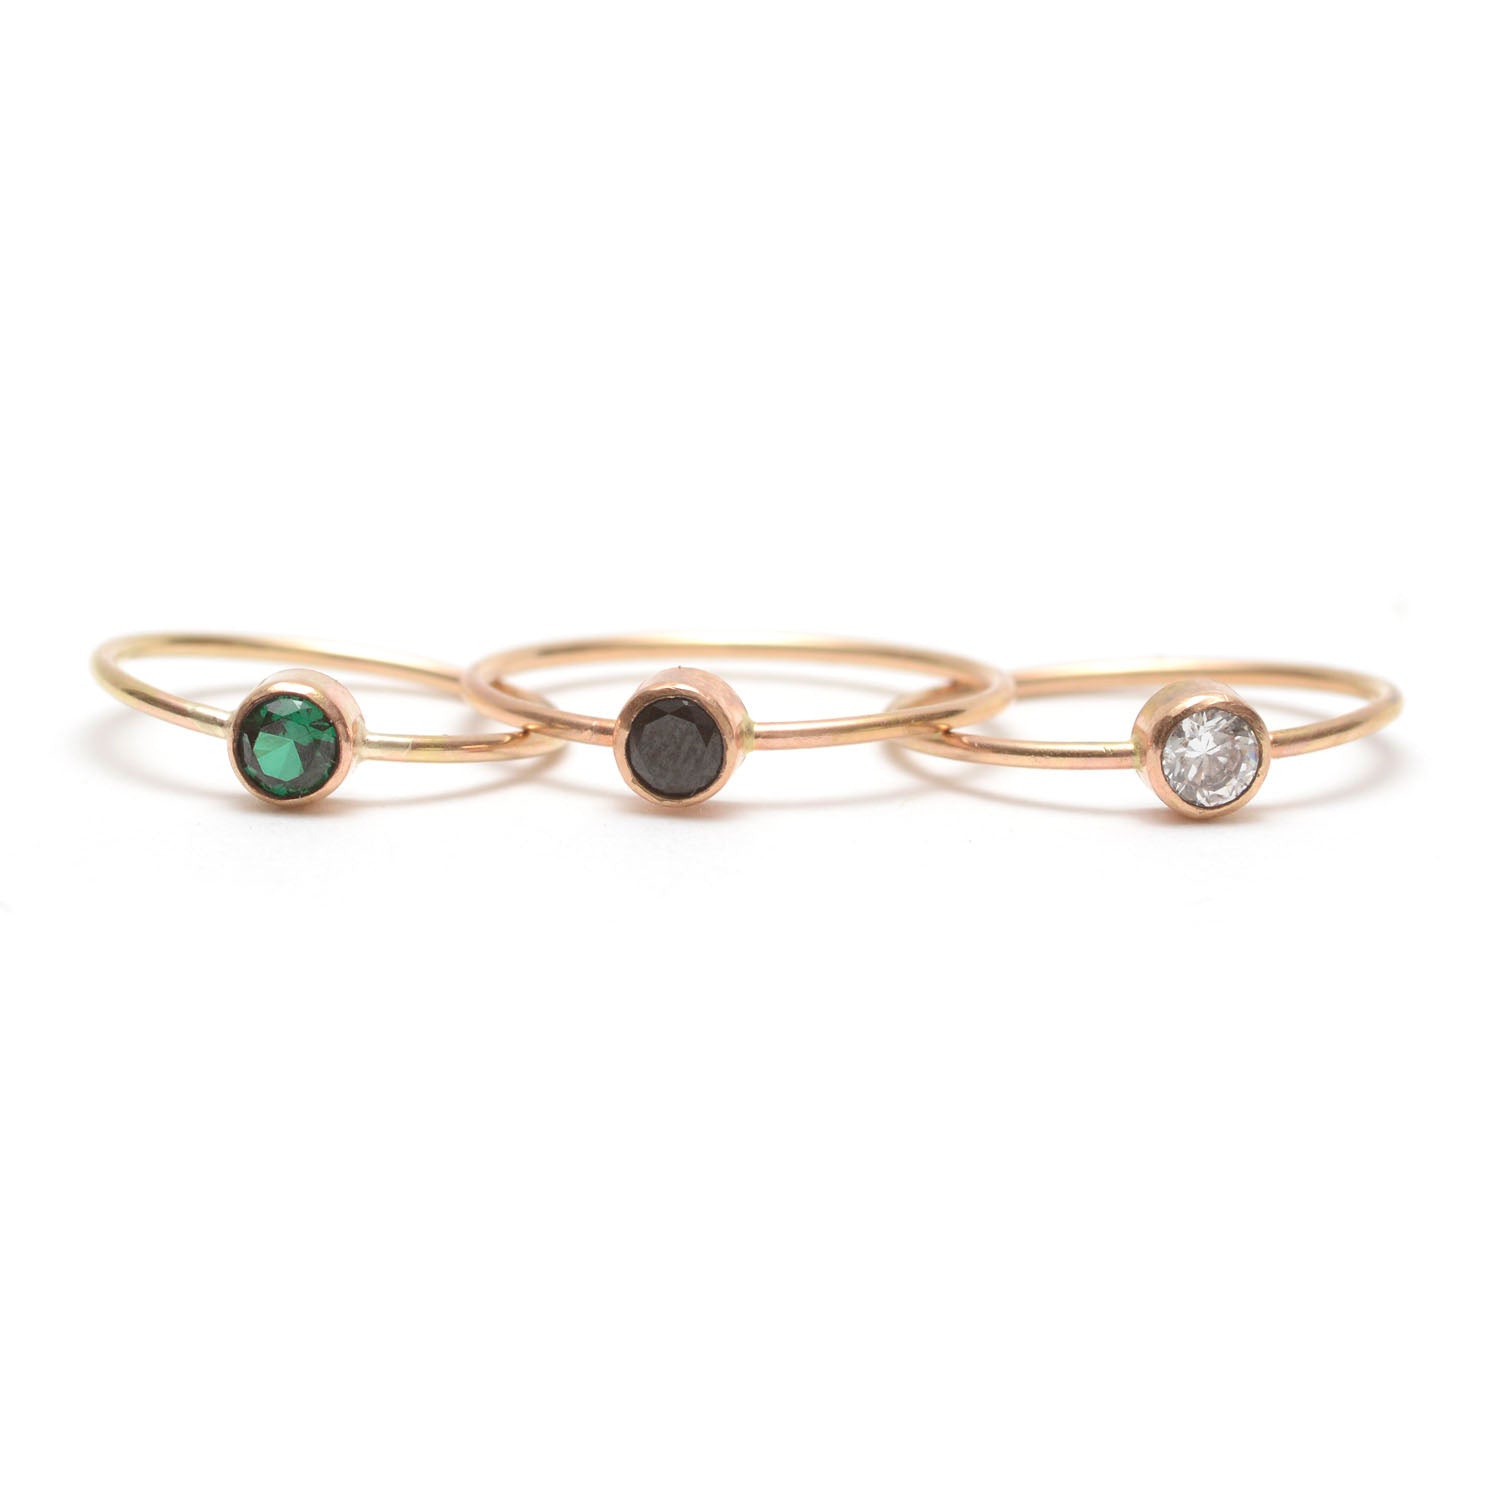 Gemstone Stacking Rings - Favor Jewelry